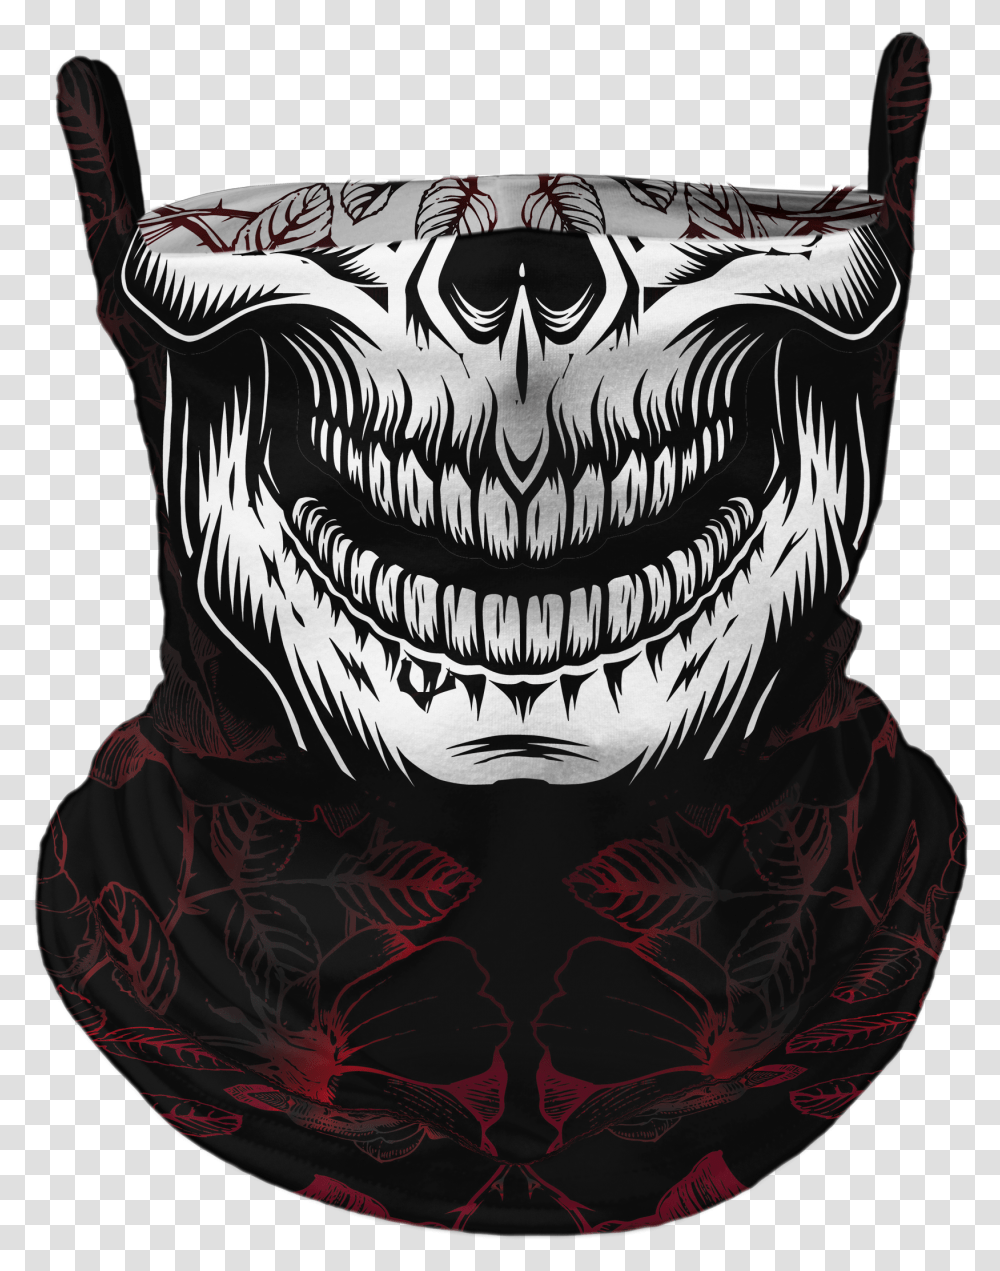 Skeletor Roses Premium Fitted Neck Gaiter With Ear Support Skull Face Mask, Pillow, Cushion, Clothing, Symbol Transparent Png